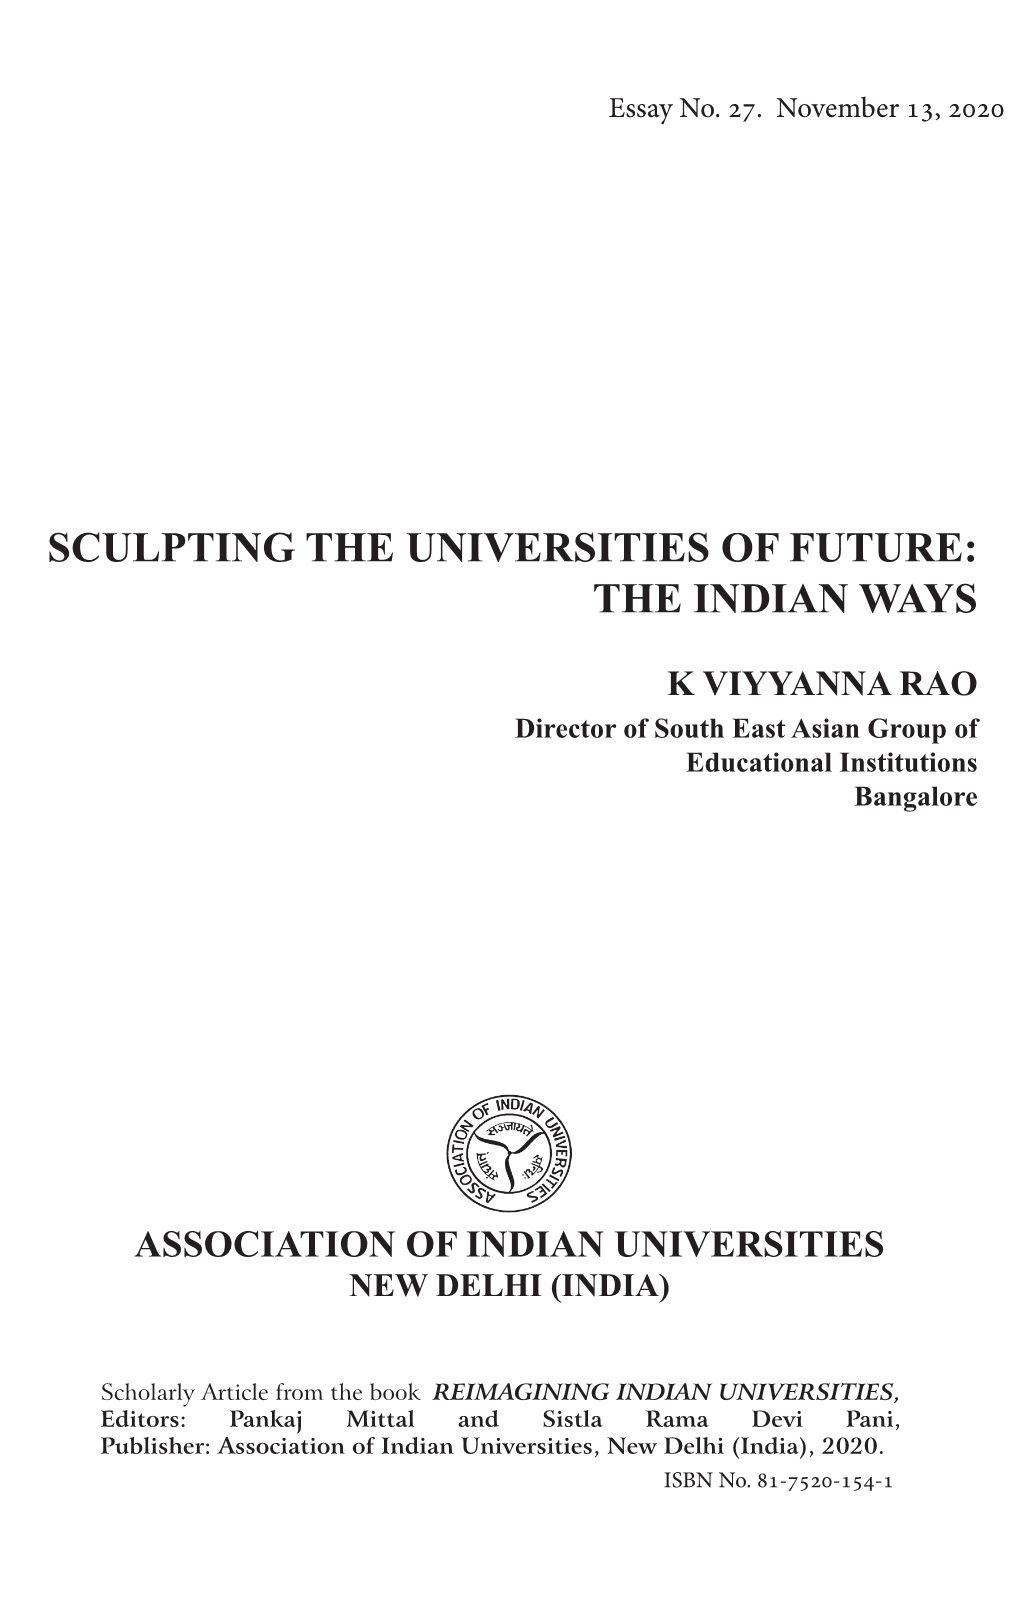 28. Sculpting the Universities of Future the Indian Ways by K